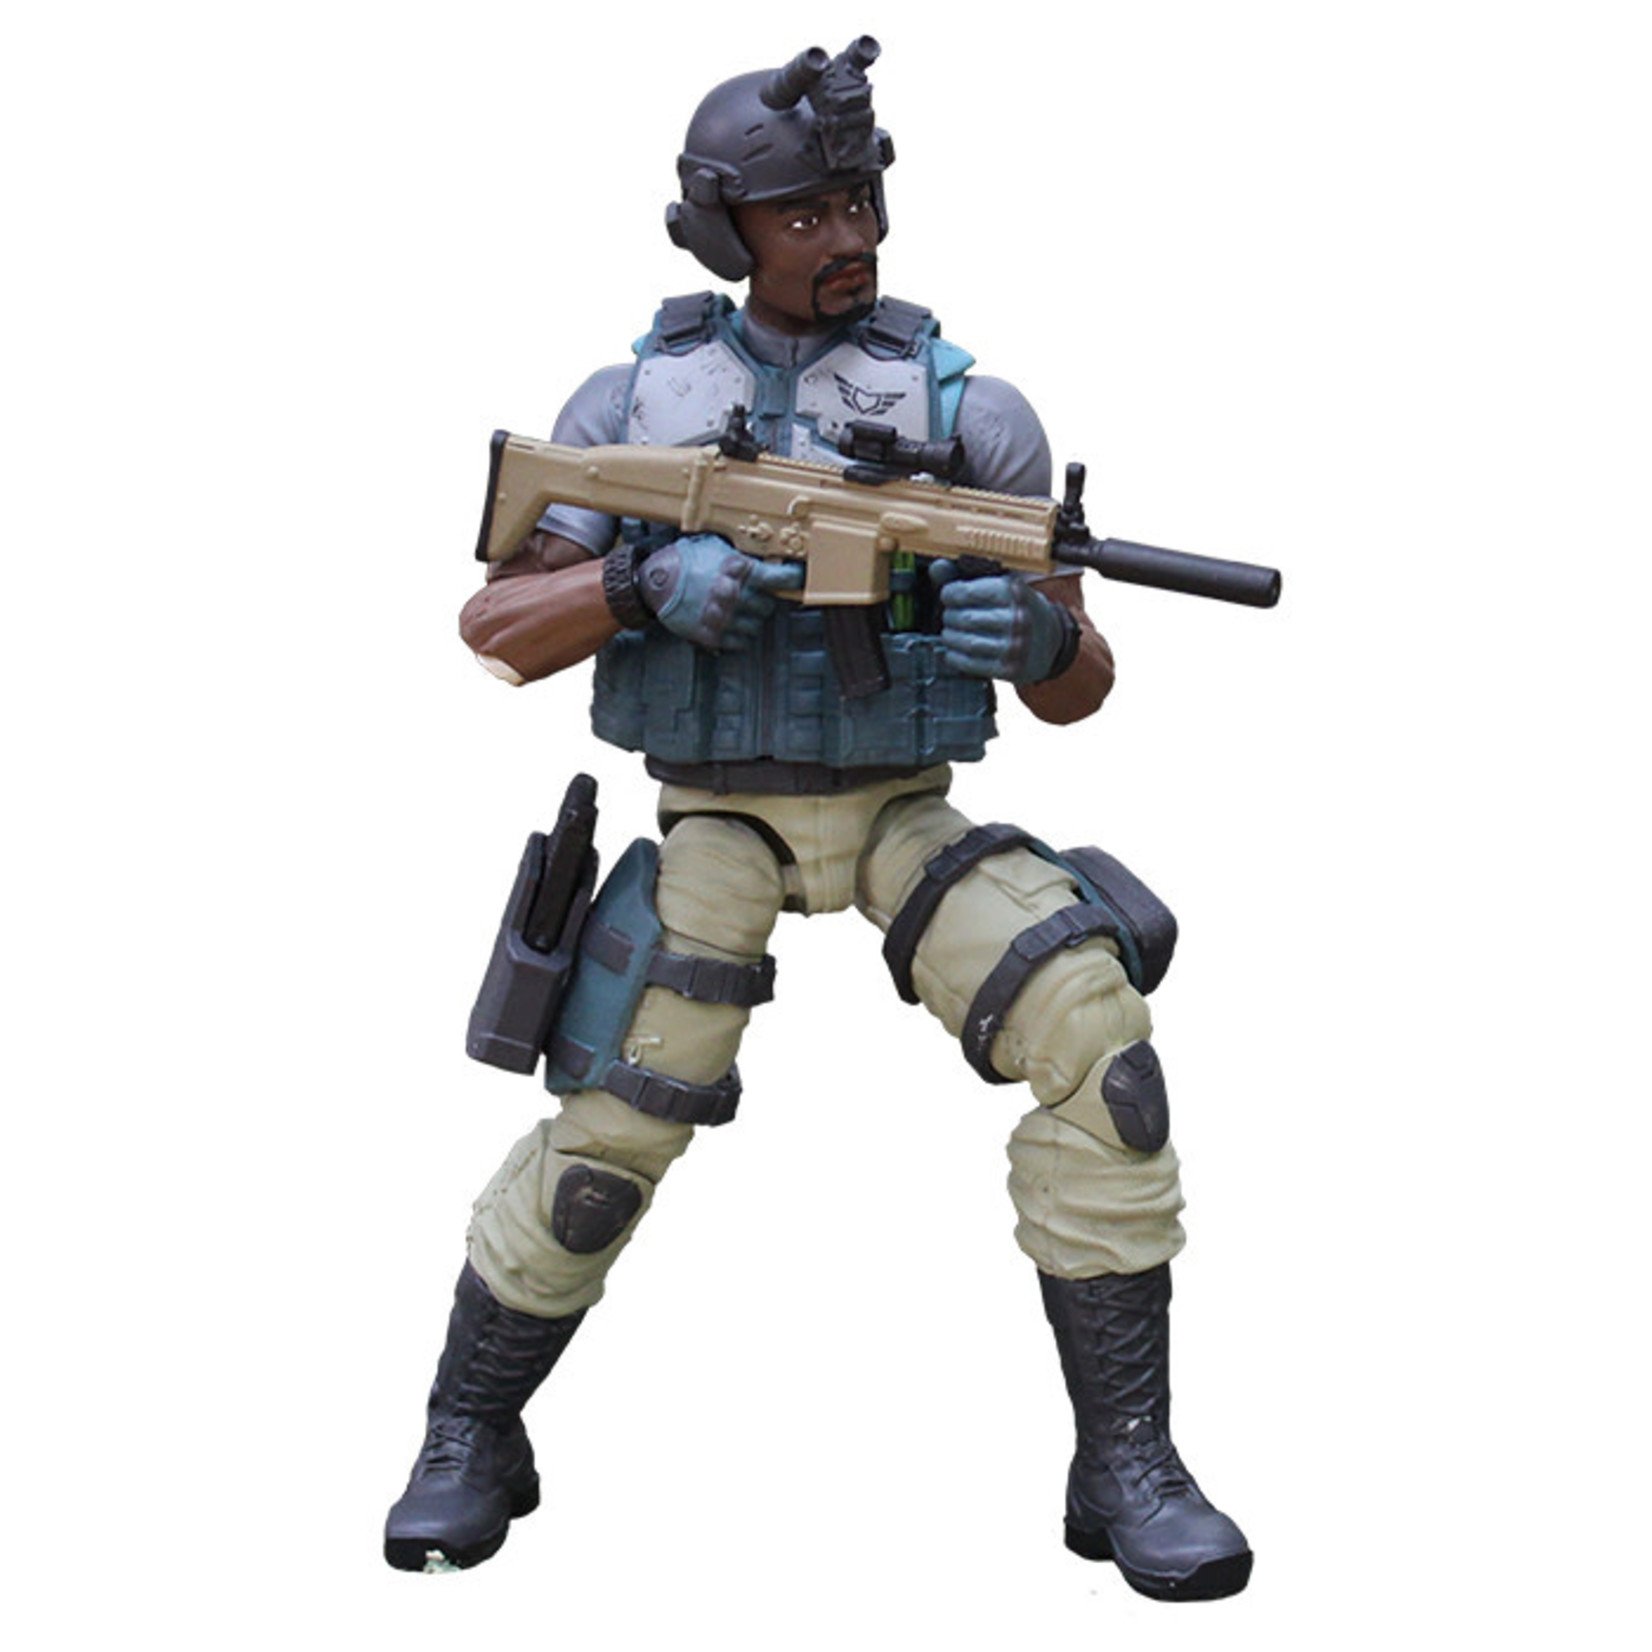 Valaverse Valaverse Action Force Rollout 1/12 Scale Action Figure - Series 2